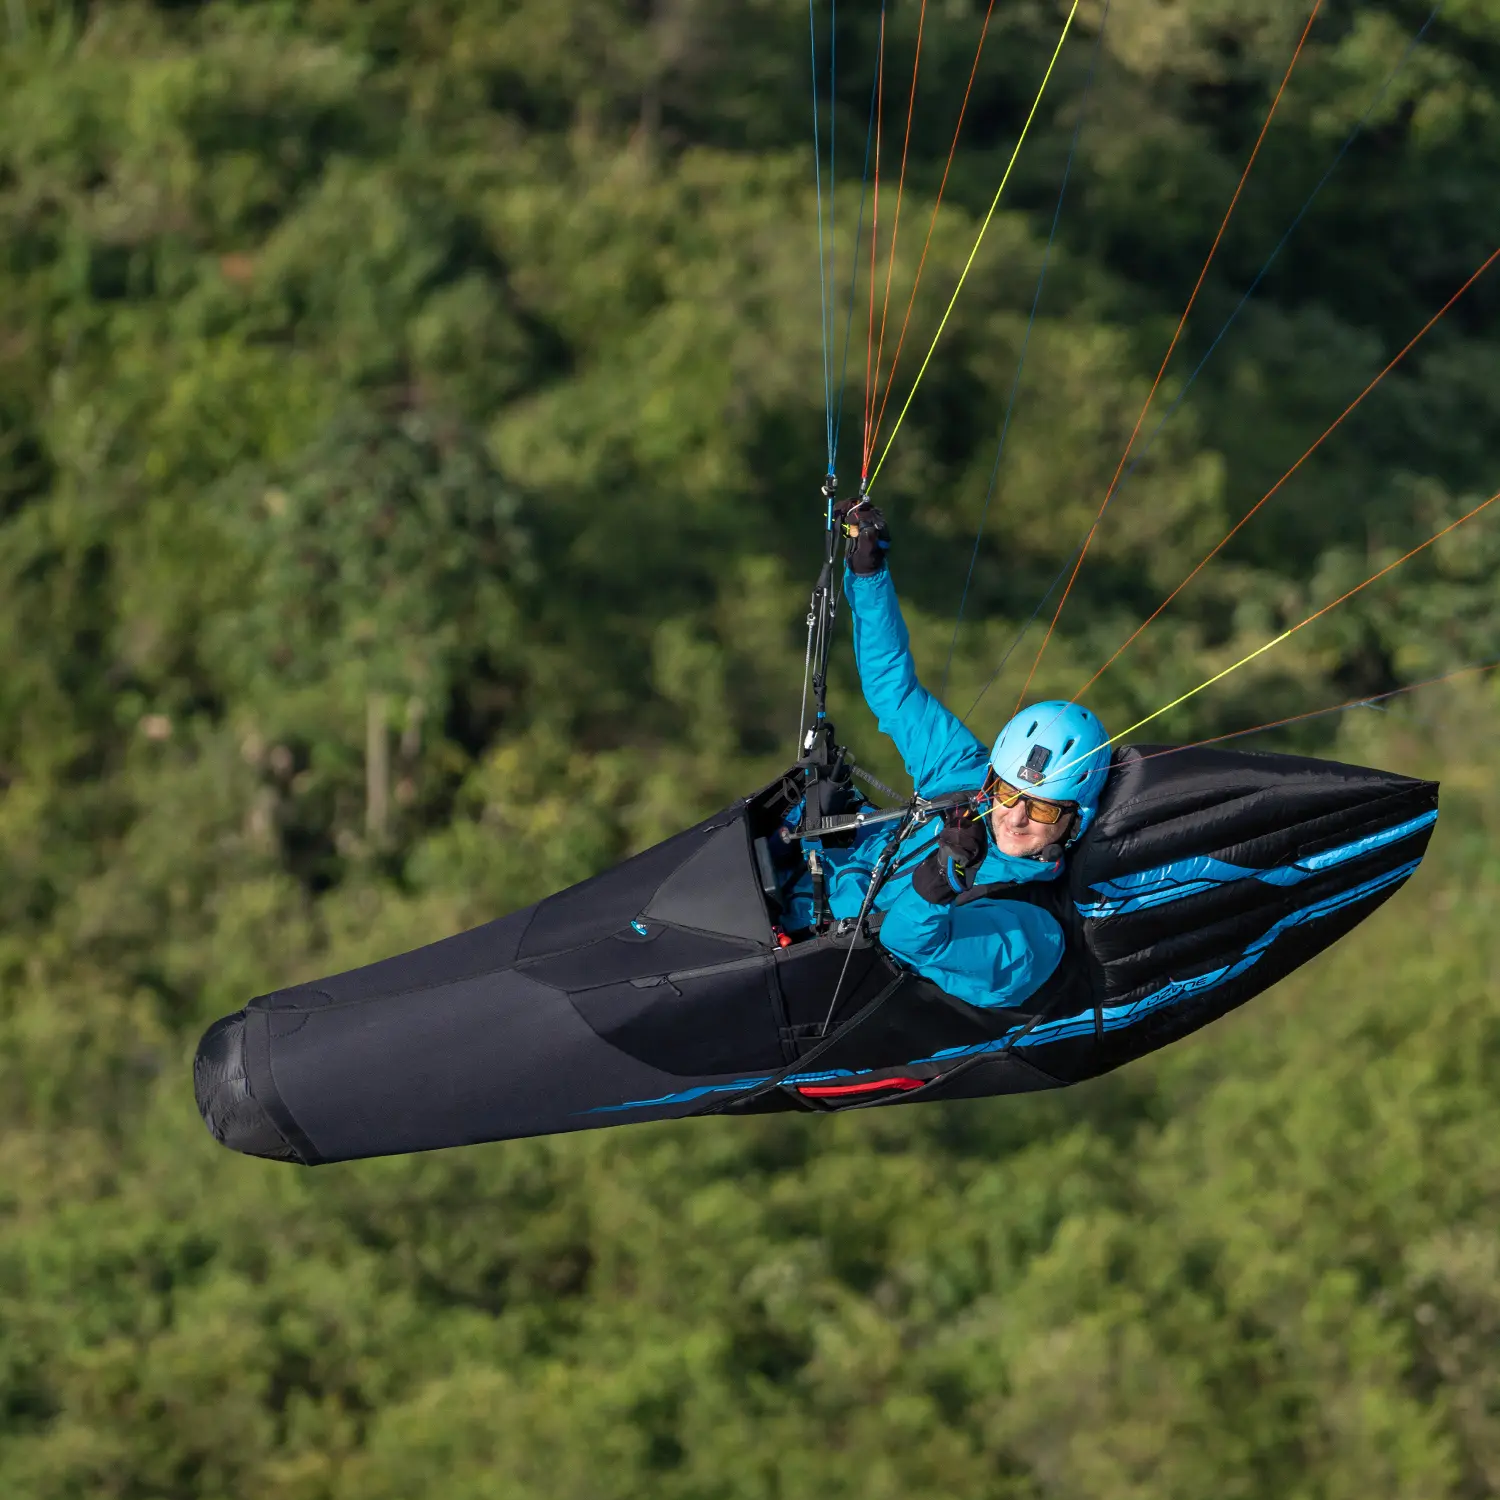 Soar in Style and Comfort with the Forza 2: Your Perfect Harness for Long XC Flights